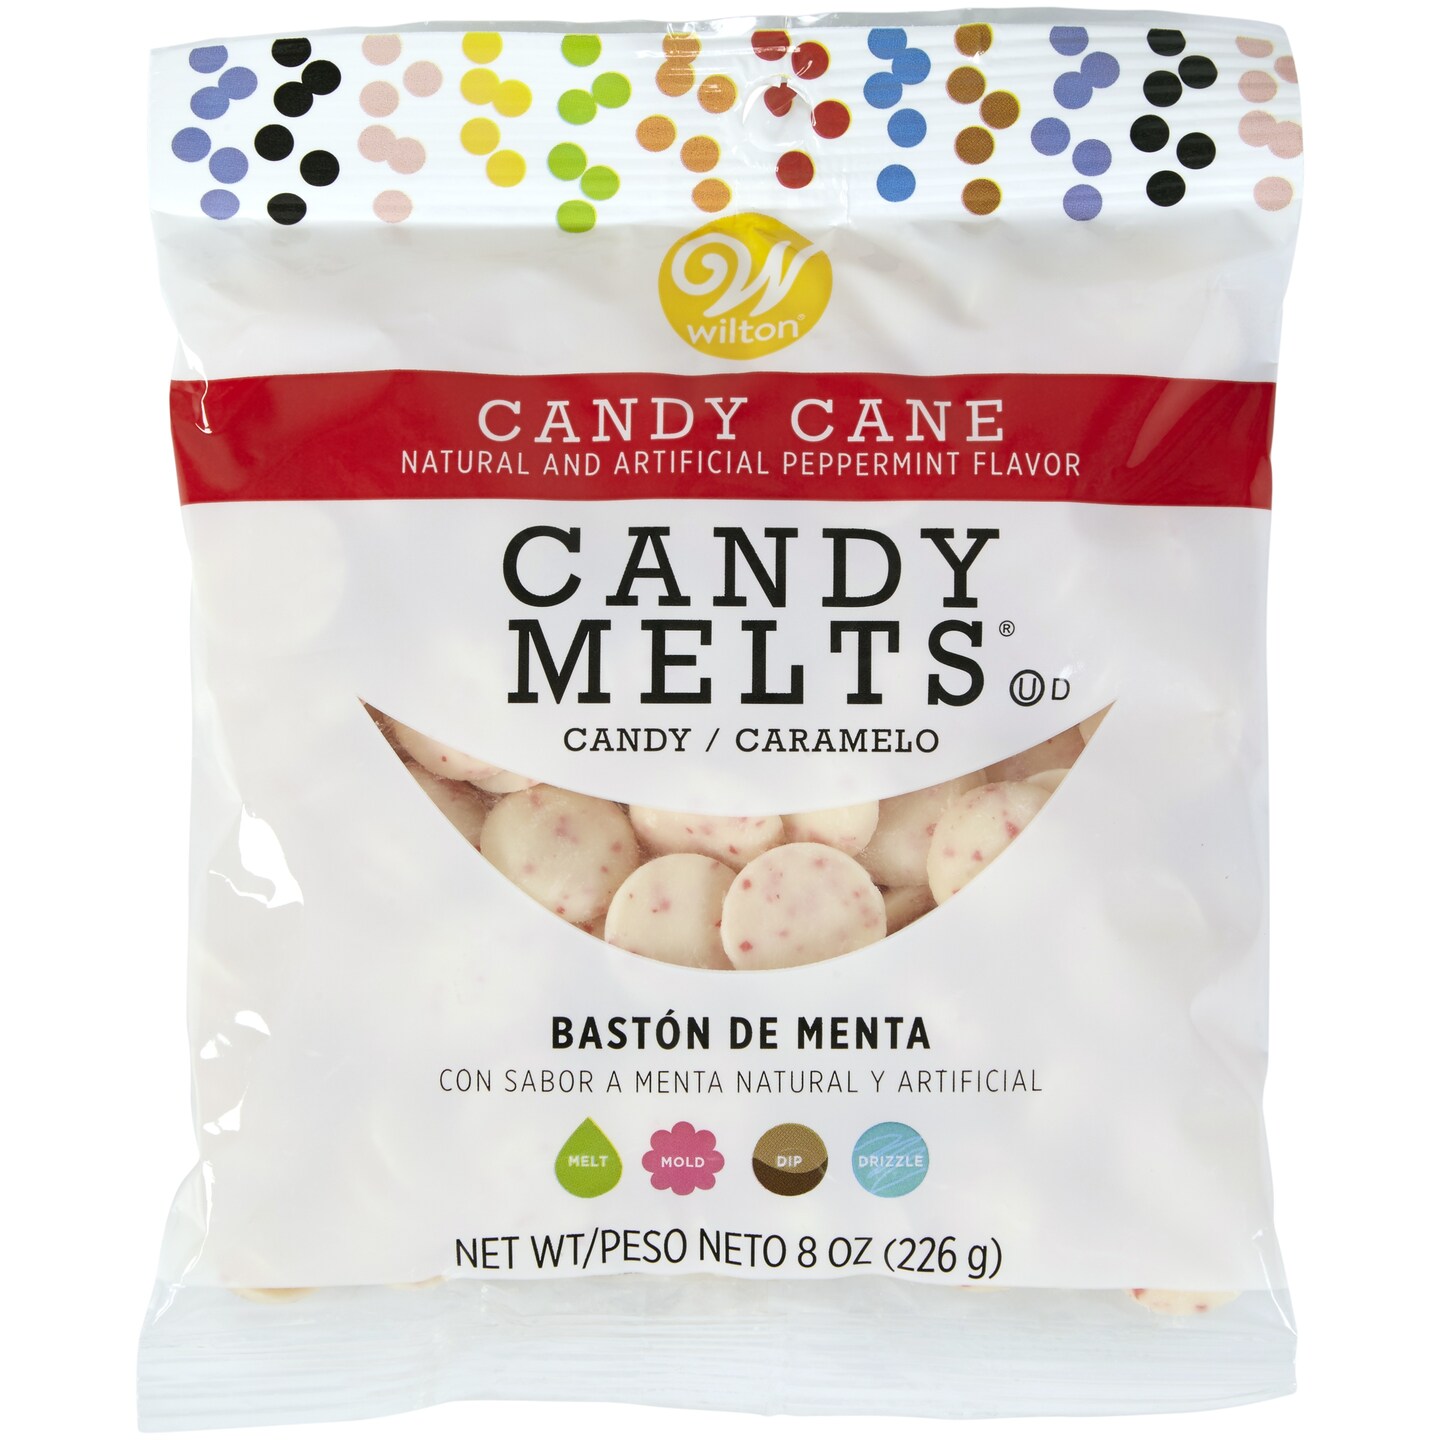 Candy Melts Candy And Chocolate Melting Pot - Wilton